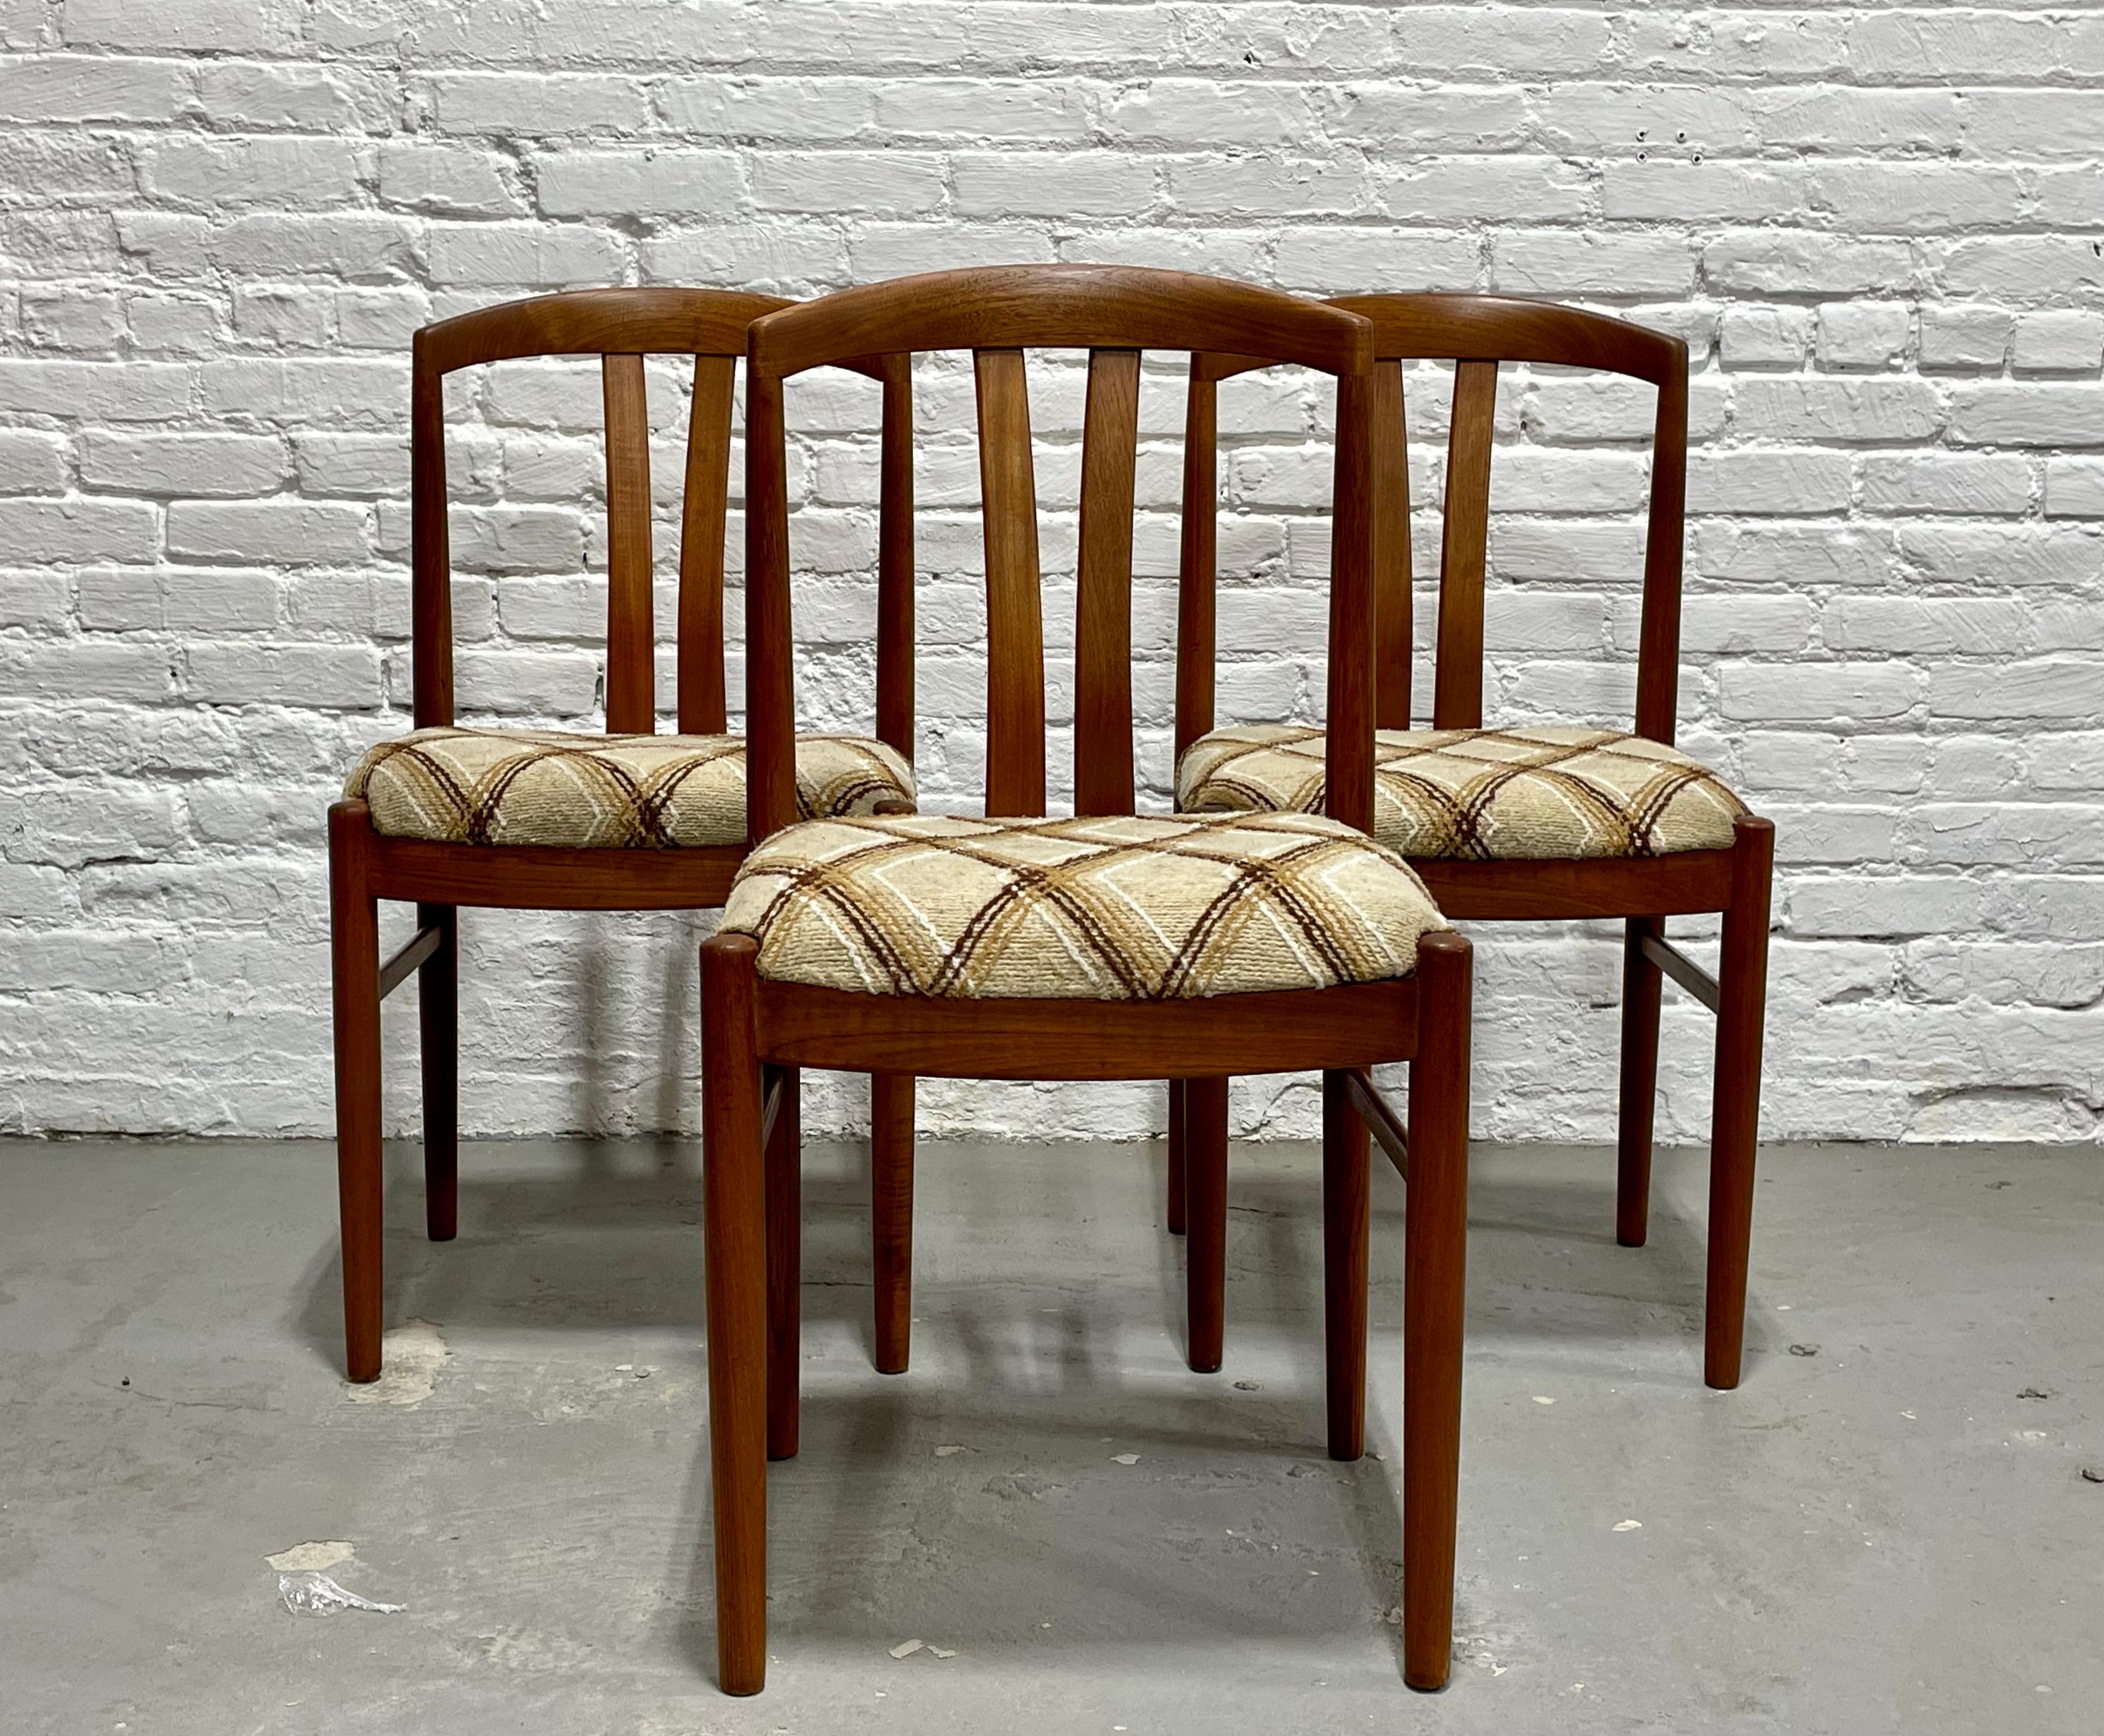 Mid Century Modern Teak set of 3 dining chairs designed by Carl Ekstrom for Albin Johansson, Made in Sweden, c. 1960's. Sculpted backrests designed for ultra comfort. Solid and sturdy design and the chairs retain the most incredible original